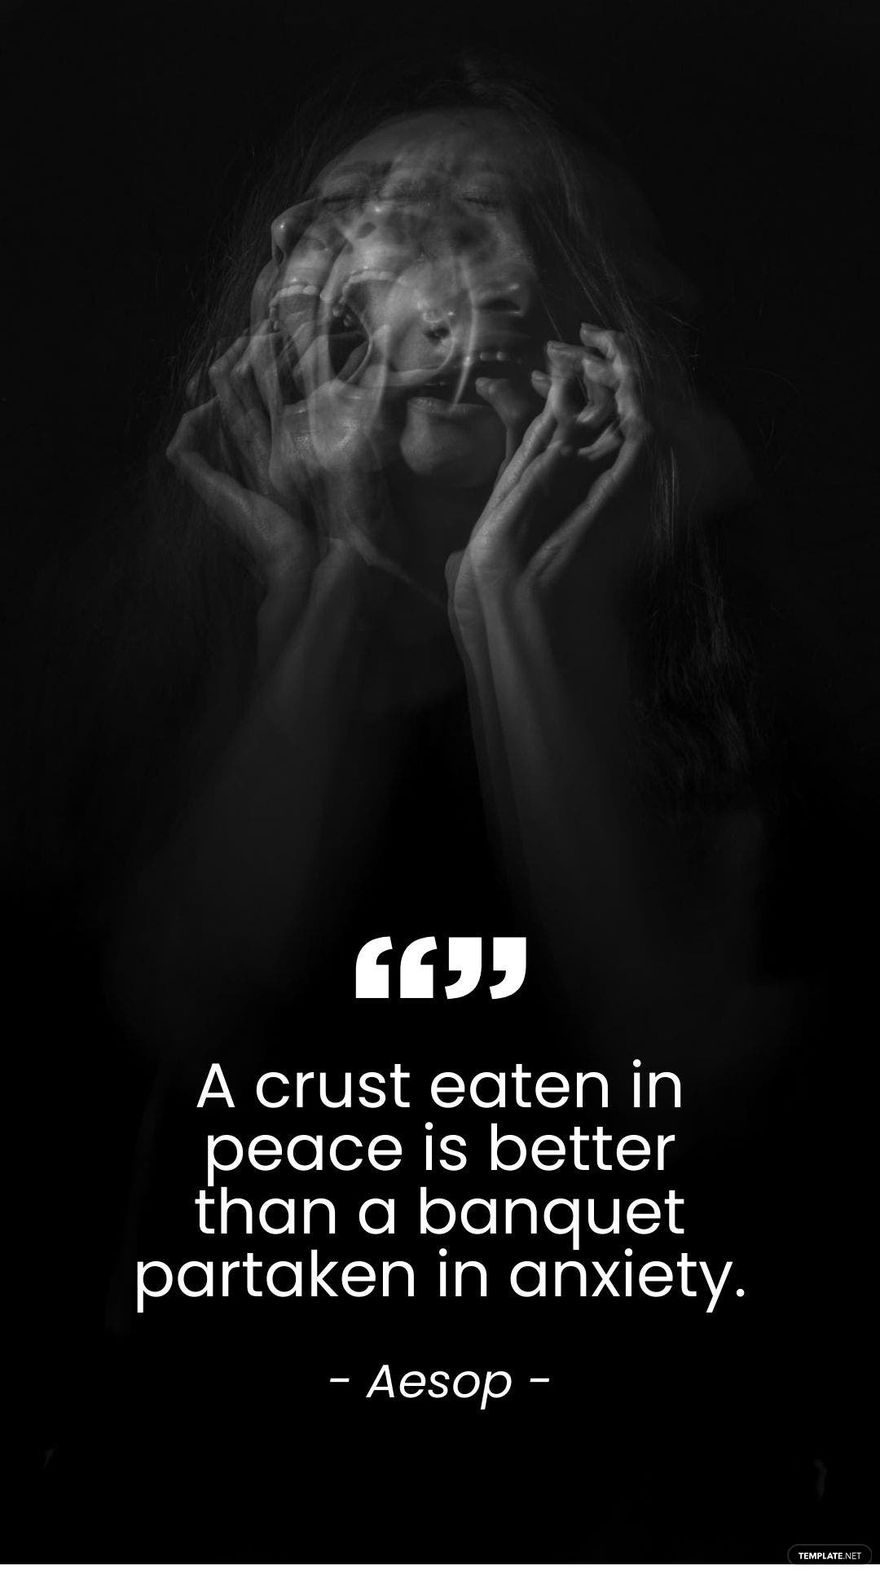 Aesop - A crust eaten in peace is better than a banquet partaken in anxiety.